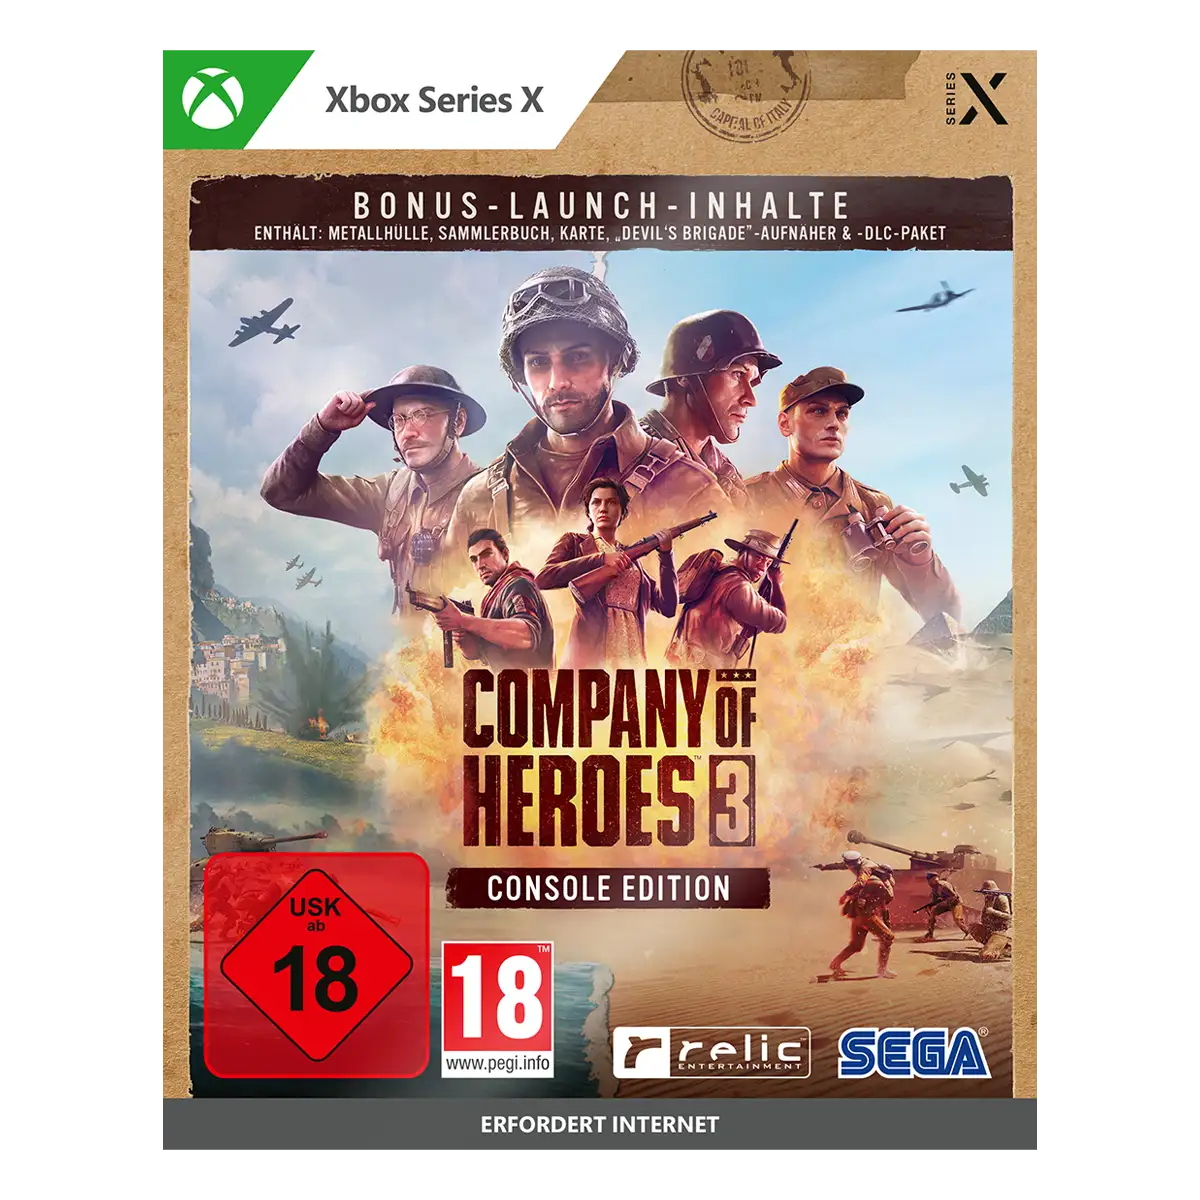 Company of Heroes 3 Launch Edition (Metal Case) (Xbox Series X)